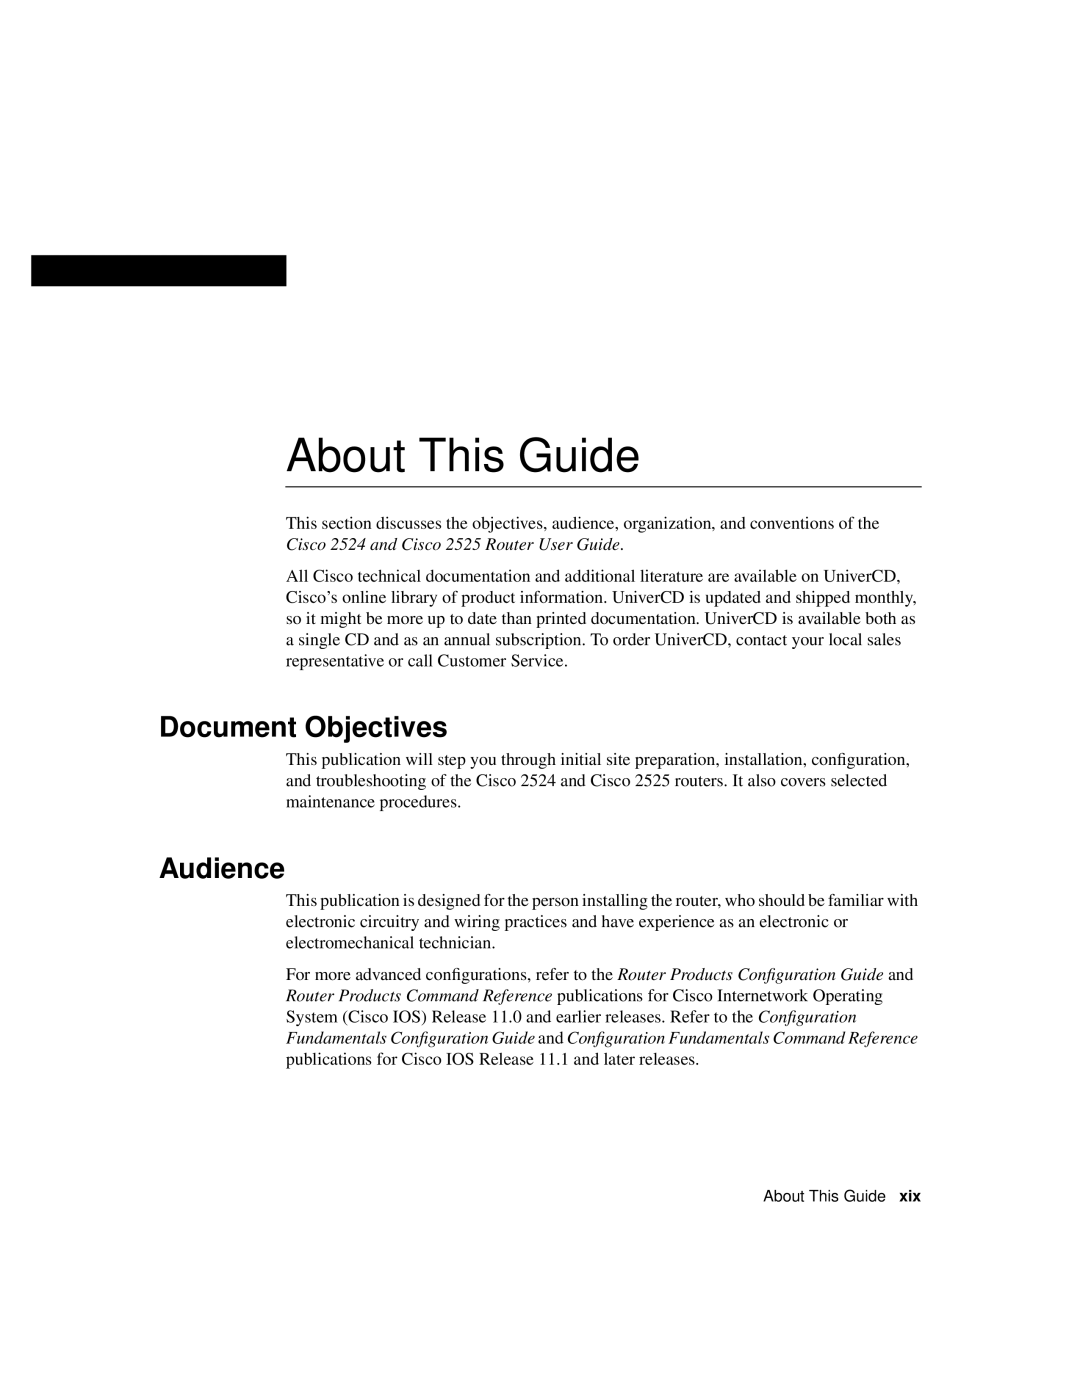 Cisco Systems 2524, 2525 manual Document Objectives, Audience, About This Guide 